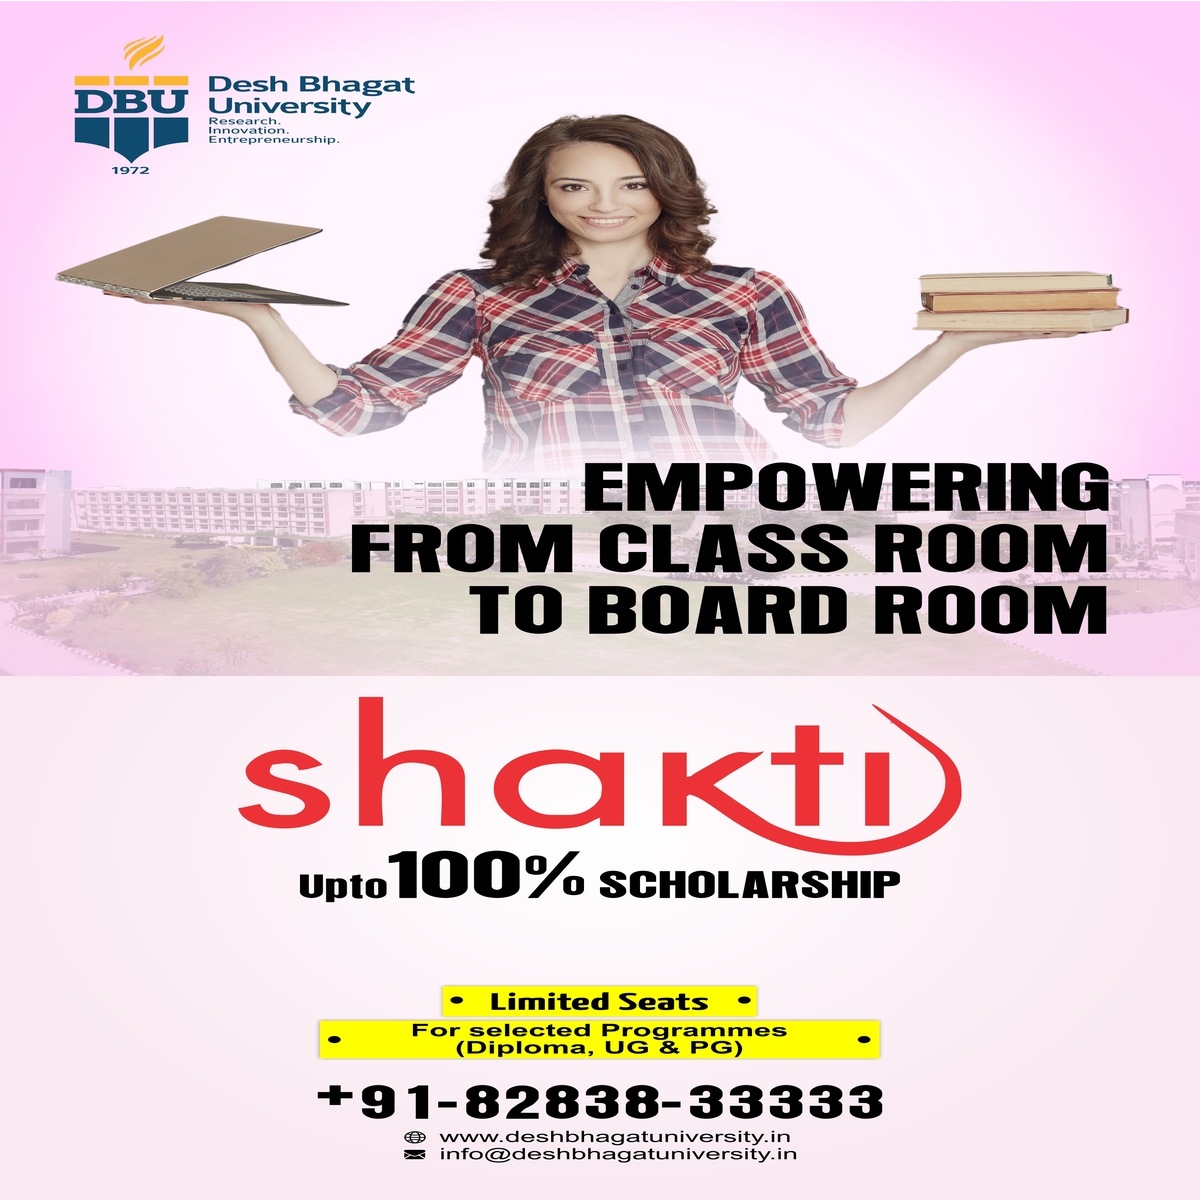 Faculty of Shakti Scholarship Empowering from class room to Board room